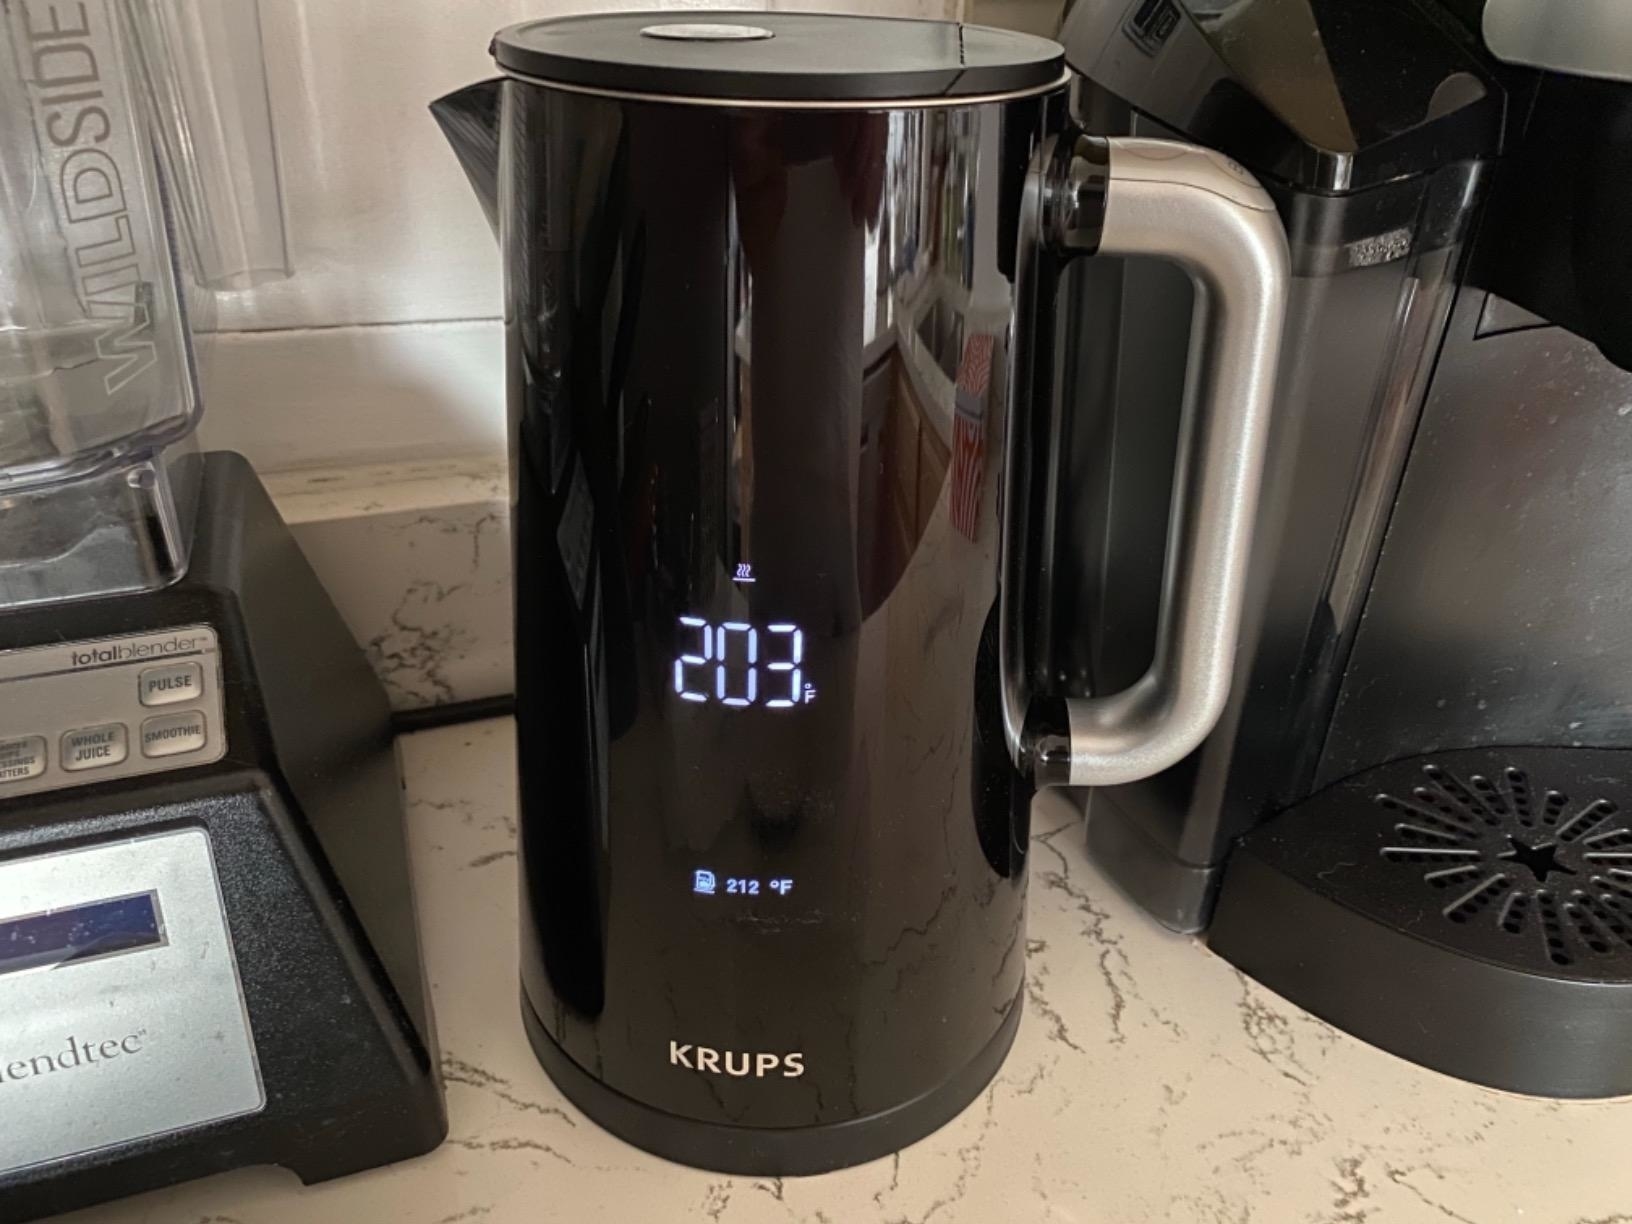 a reviewer photo of the kettle with &quot;203&quot; on the display